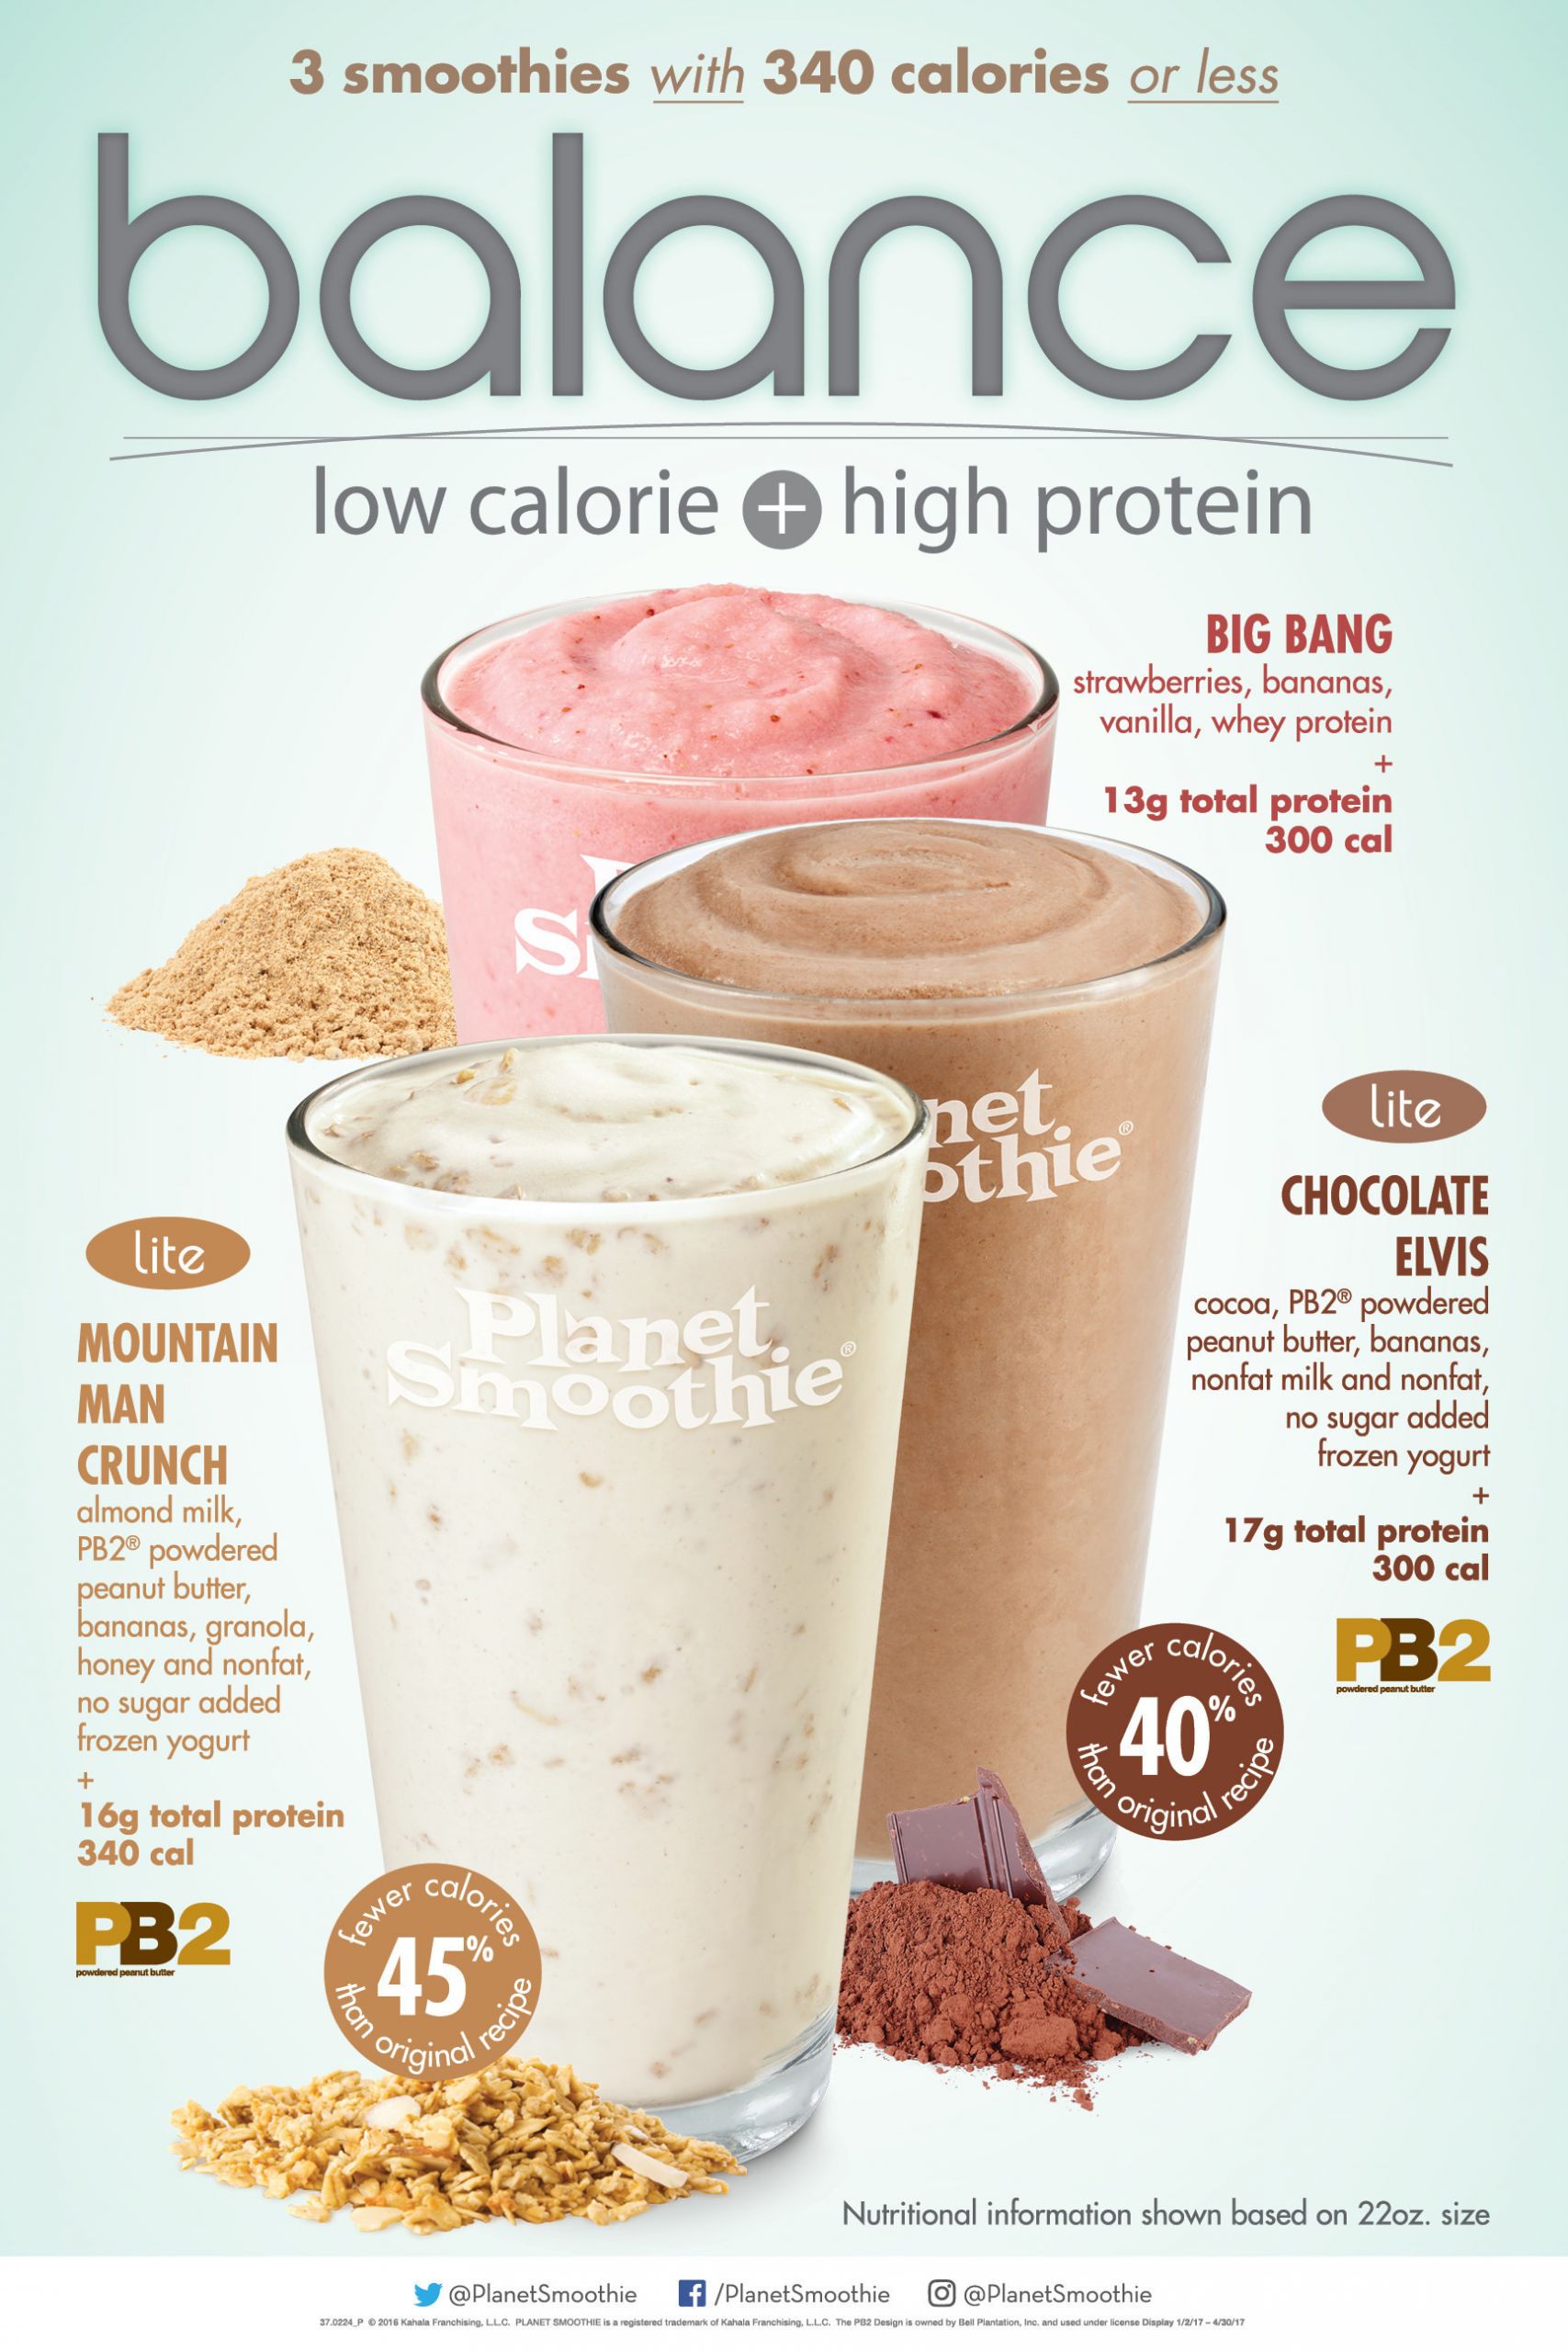 Low Calorie High Protein Smoothies Fresh Planet Smoothie Features Three Low Calorie High Protein